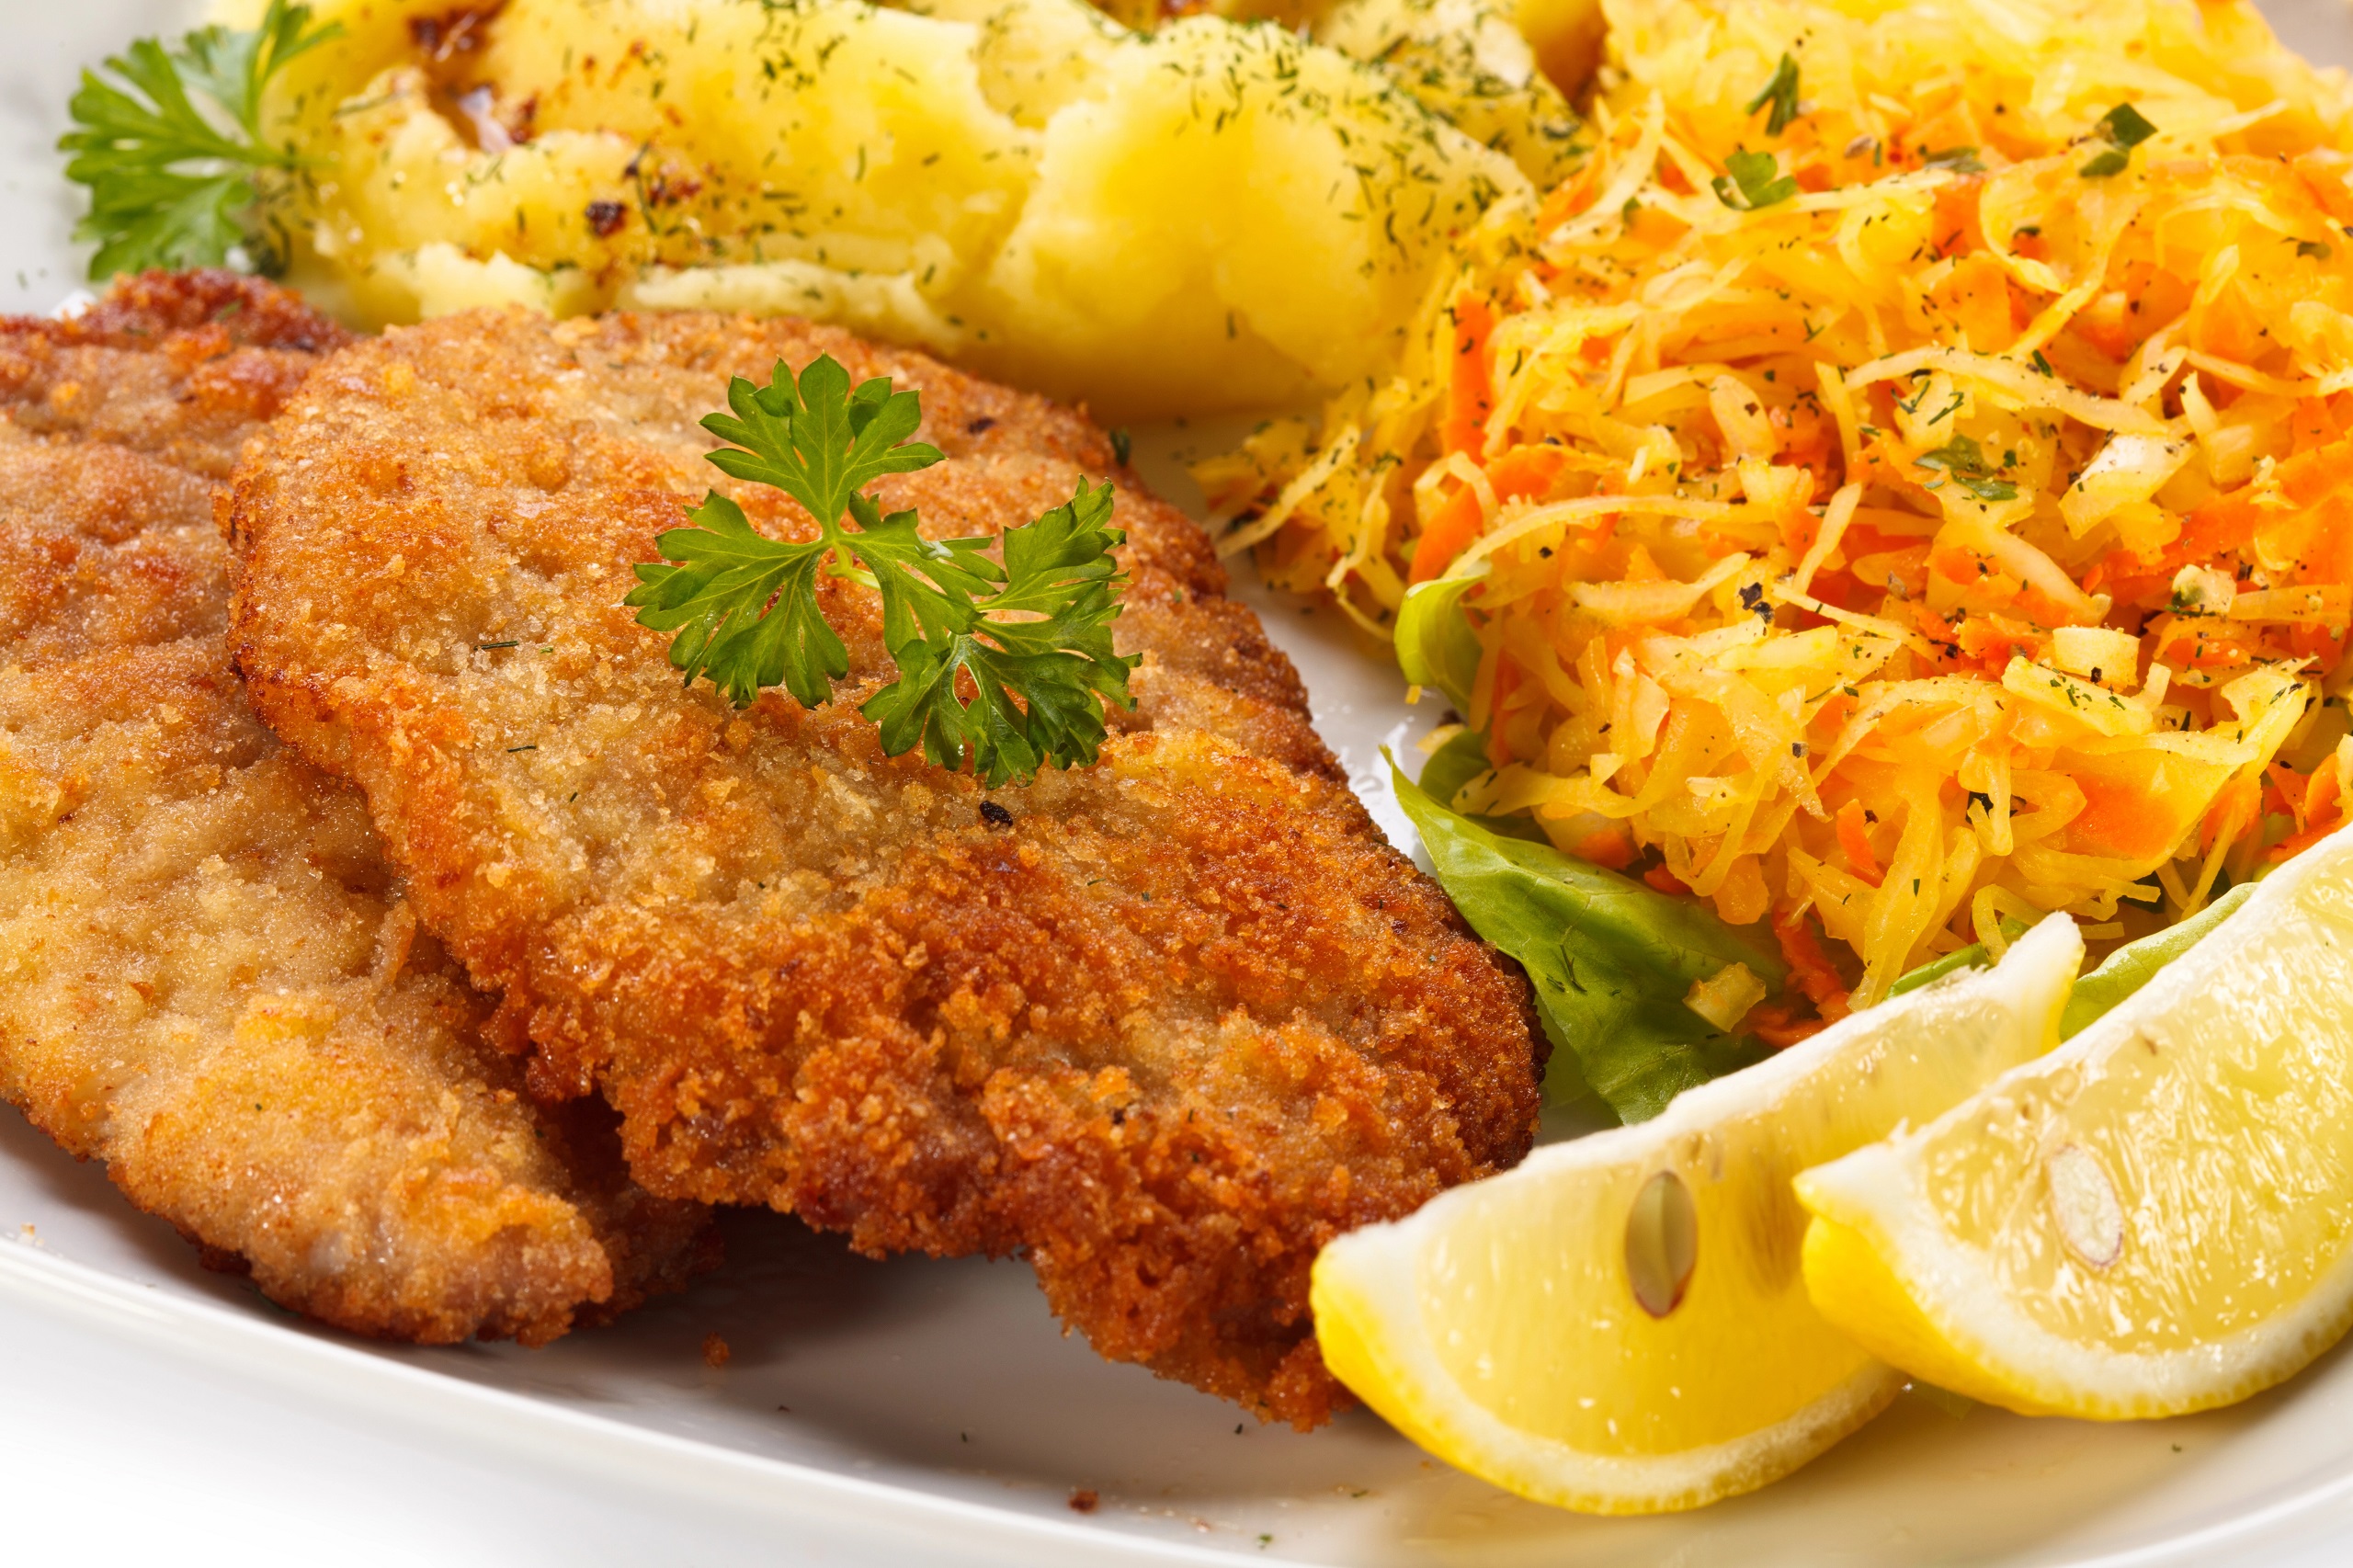 Breaded pork cutlet with mashed potatoes and sauerkraut salad on a white plate garnished with parsley and lemon wedges.